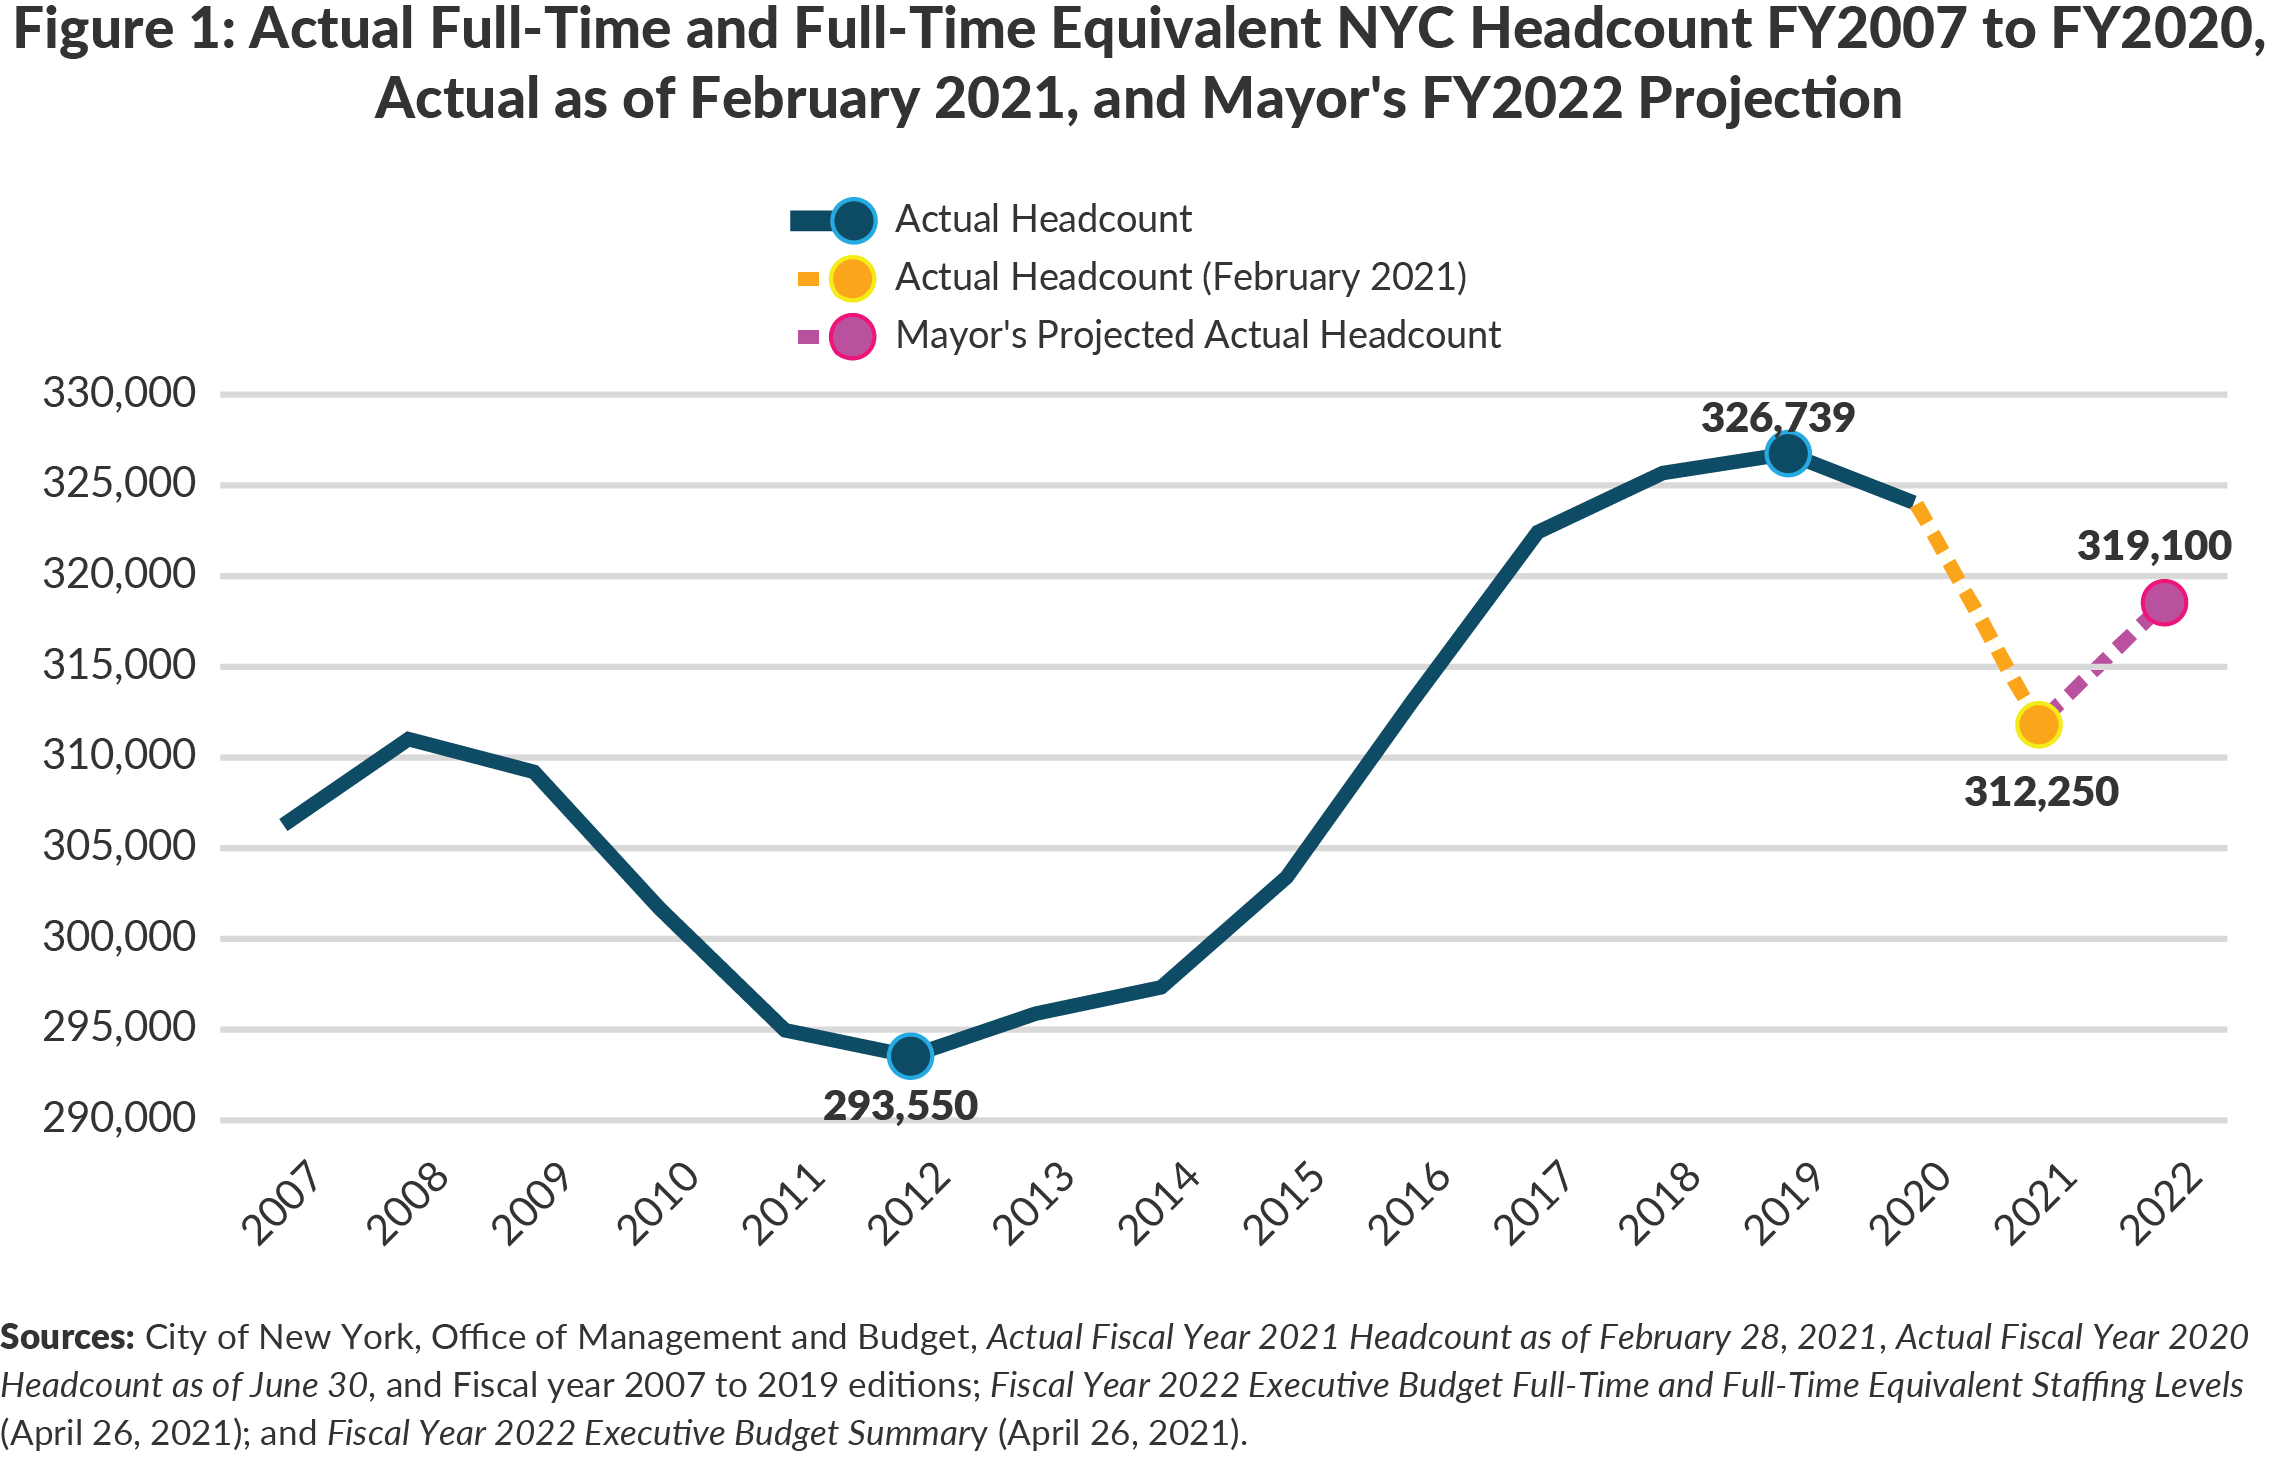 Figure 1. Actual Full-Time and Full-Time Equivalent NYC Headcount FY2007-FY2020, Actual as of February 2021, And Mayor's FY2022 Projection